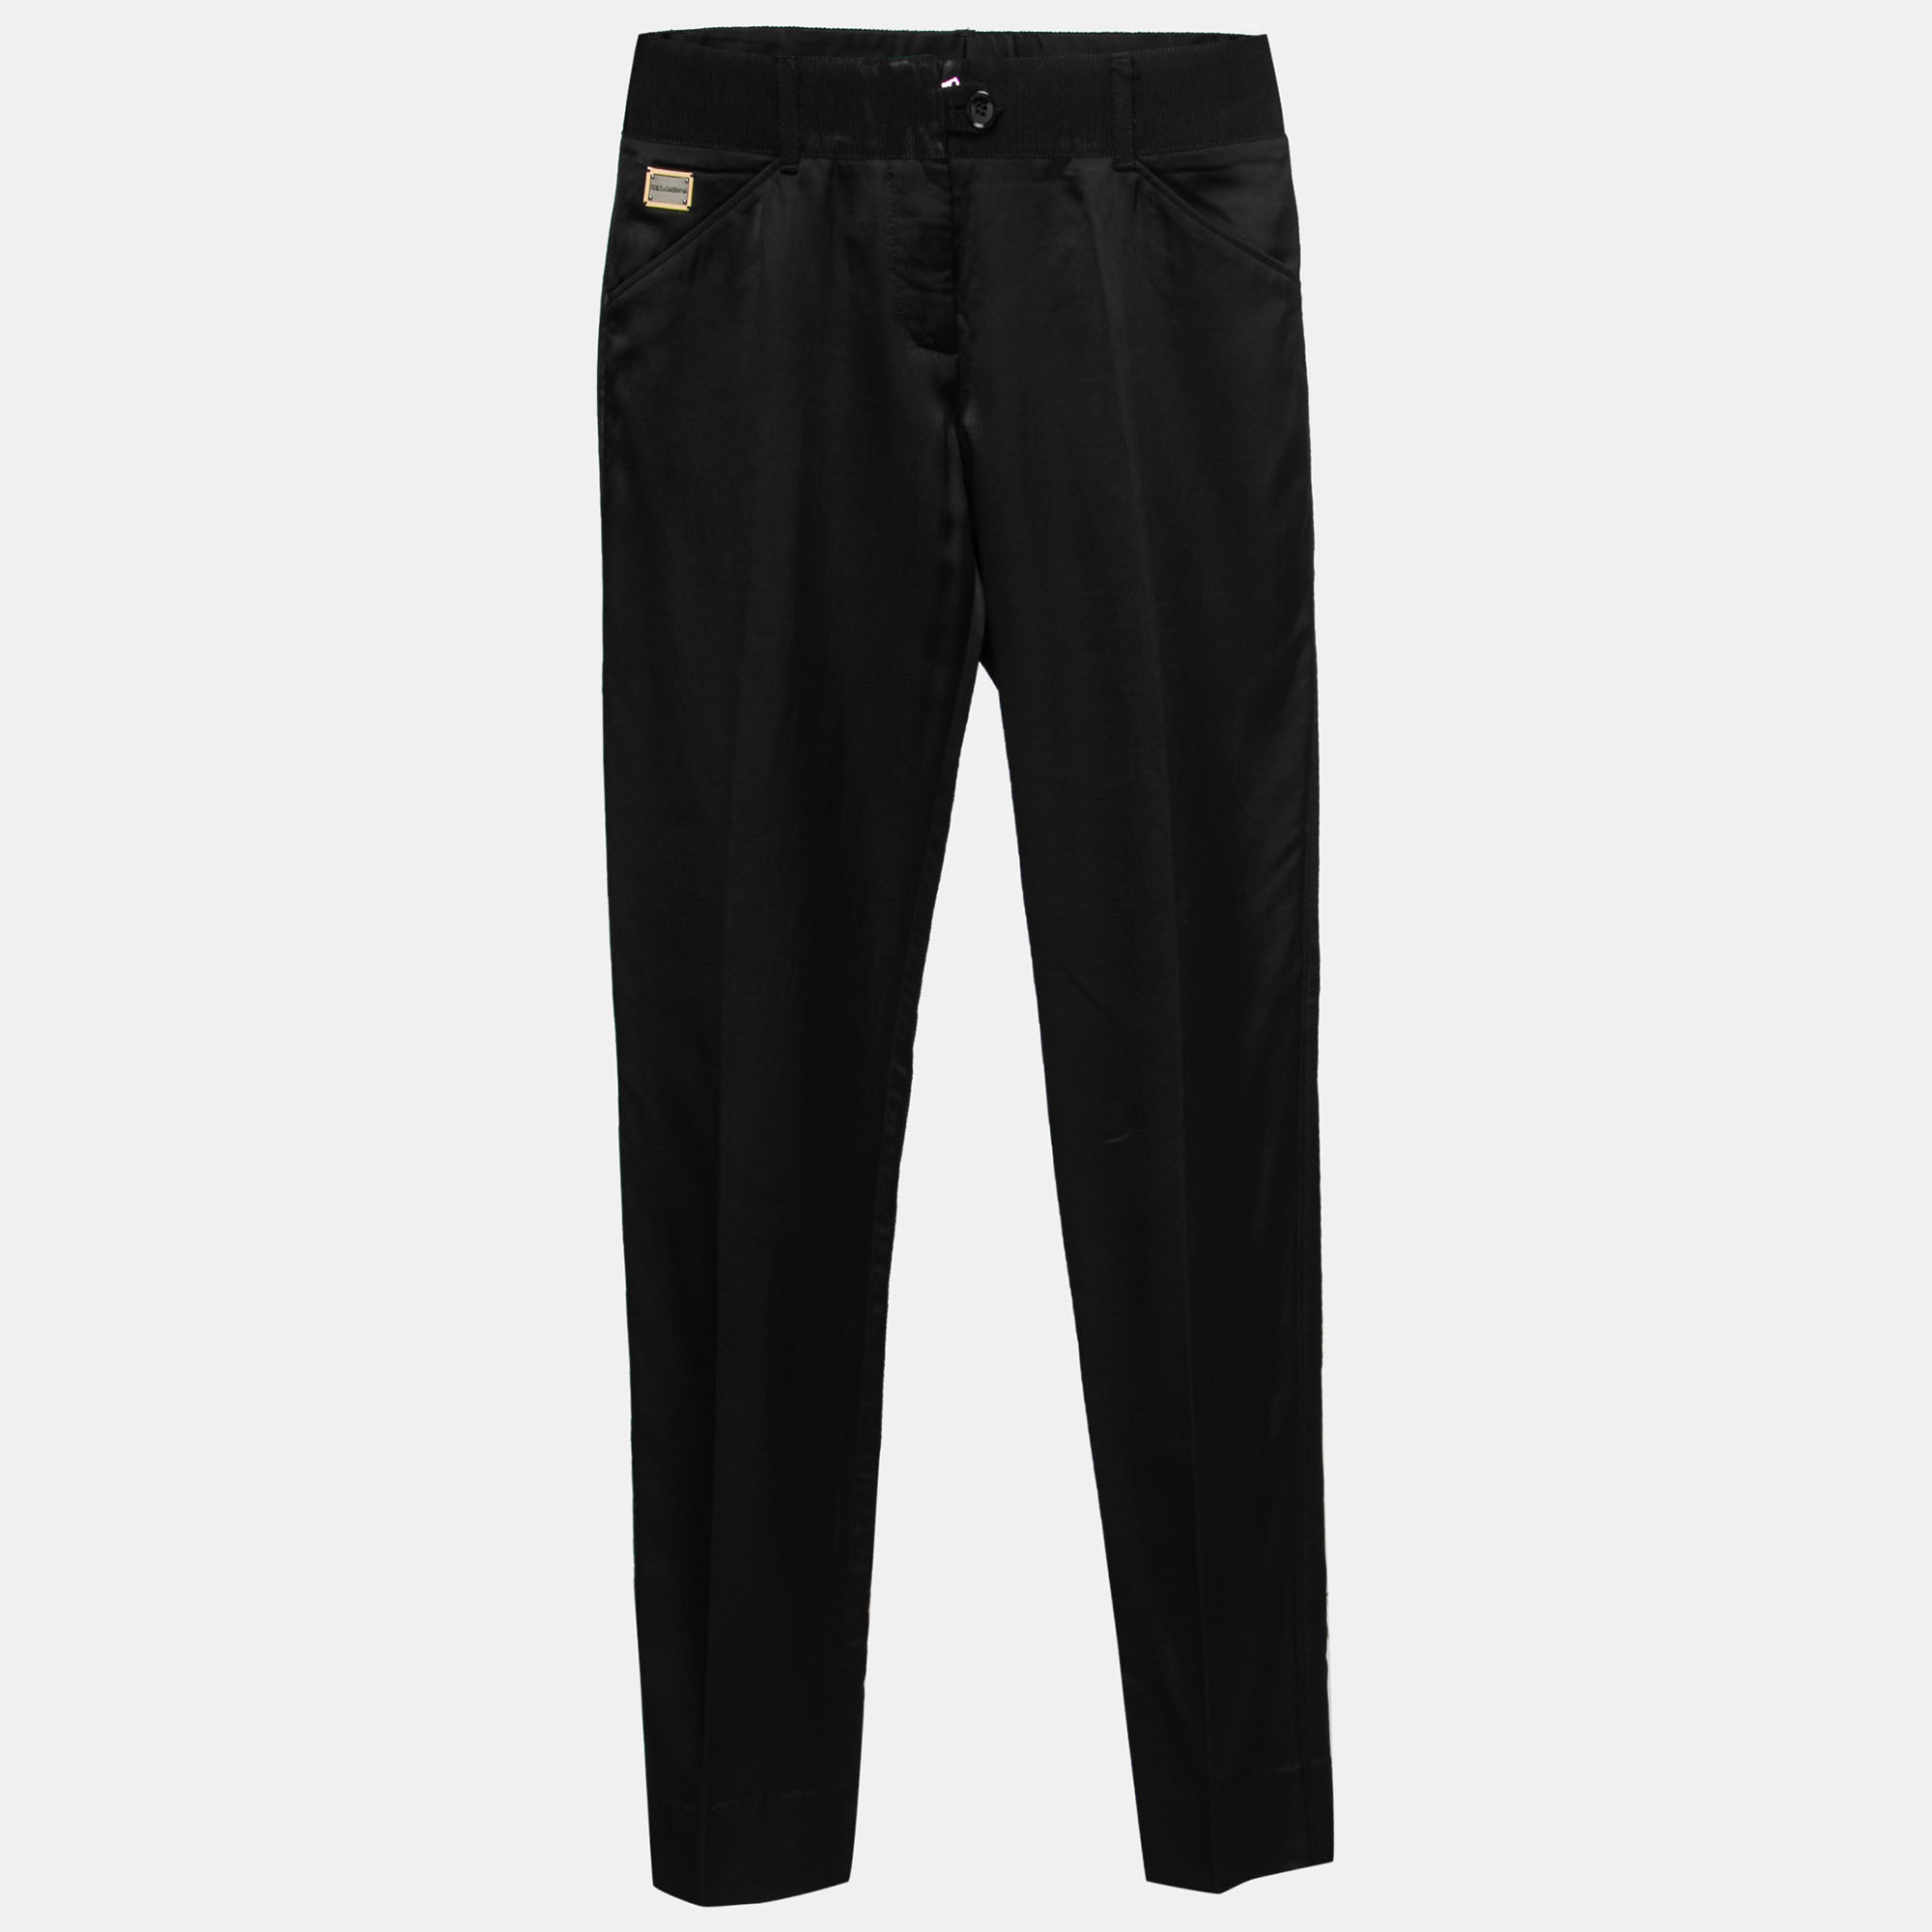 Pre-owned Dolce & Gabbana Black Satin Wool Tailored Pants S